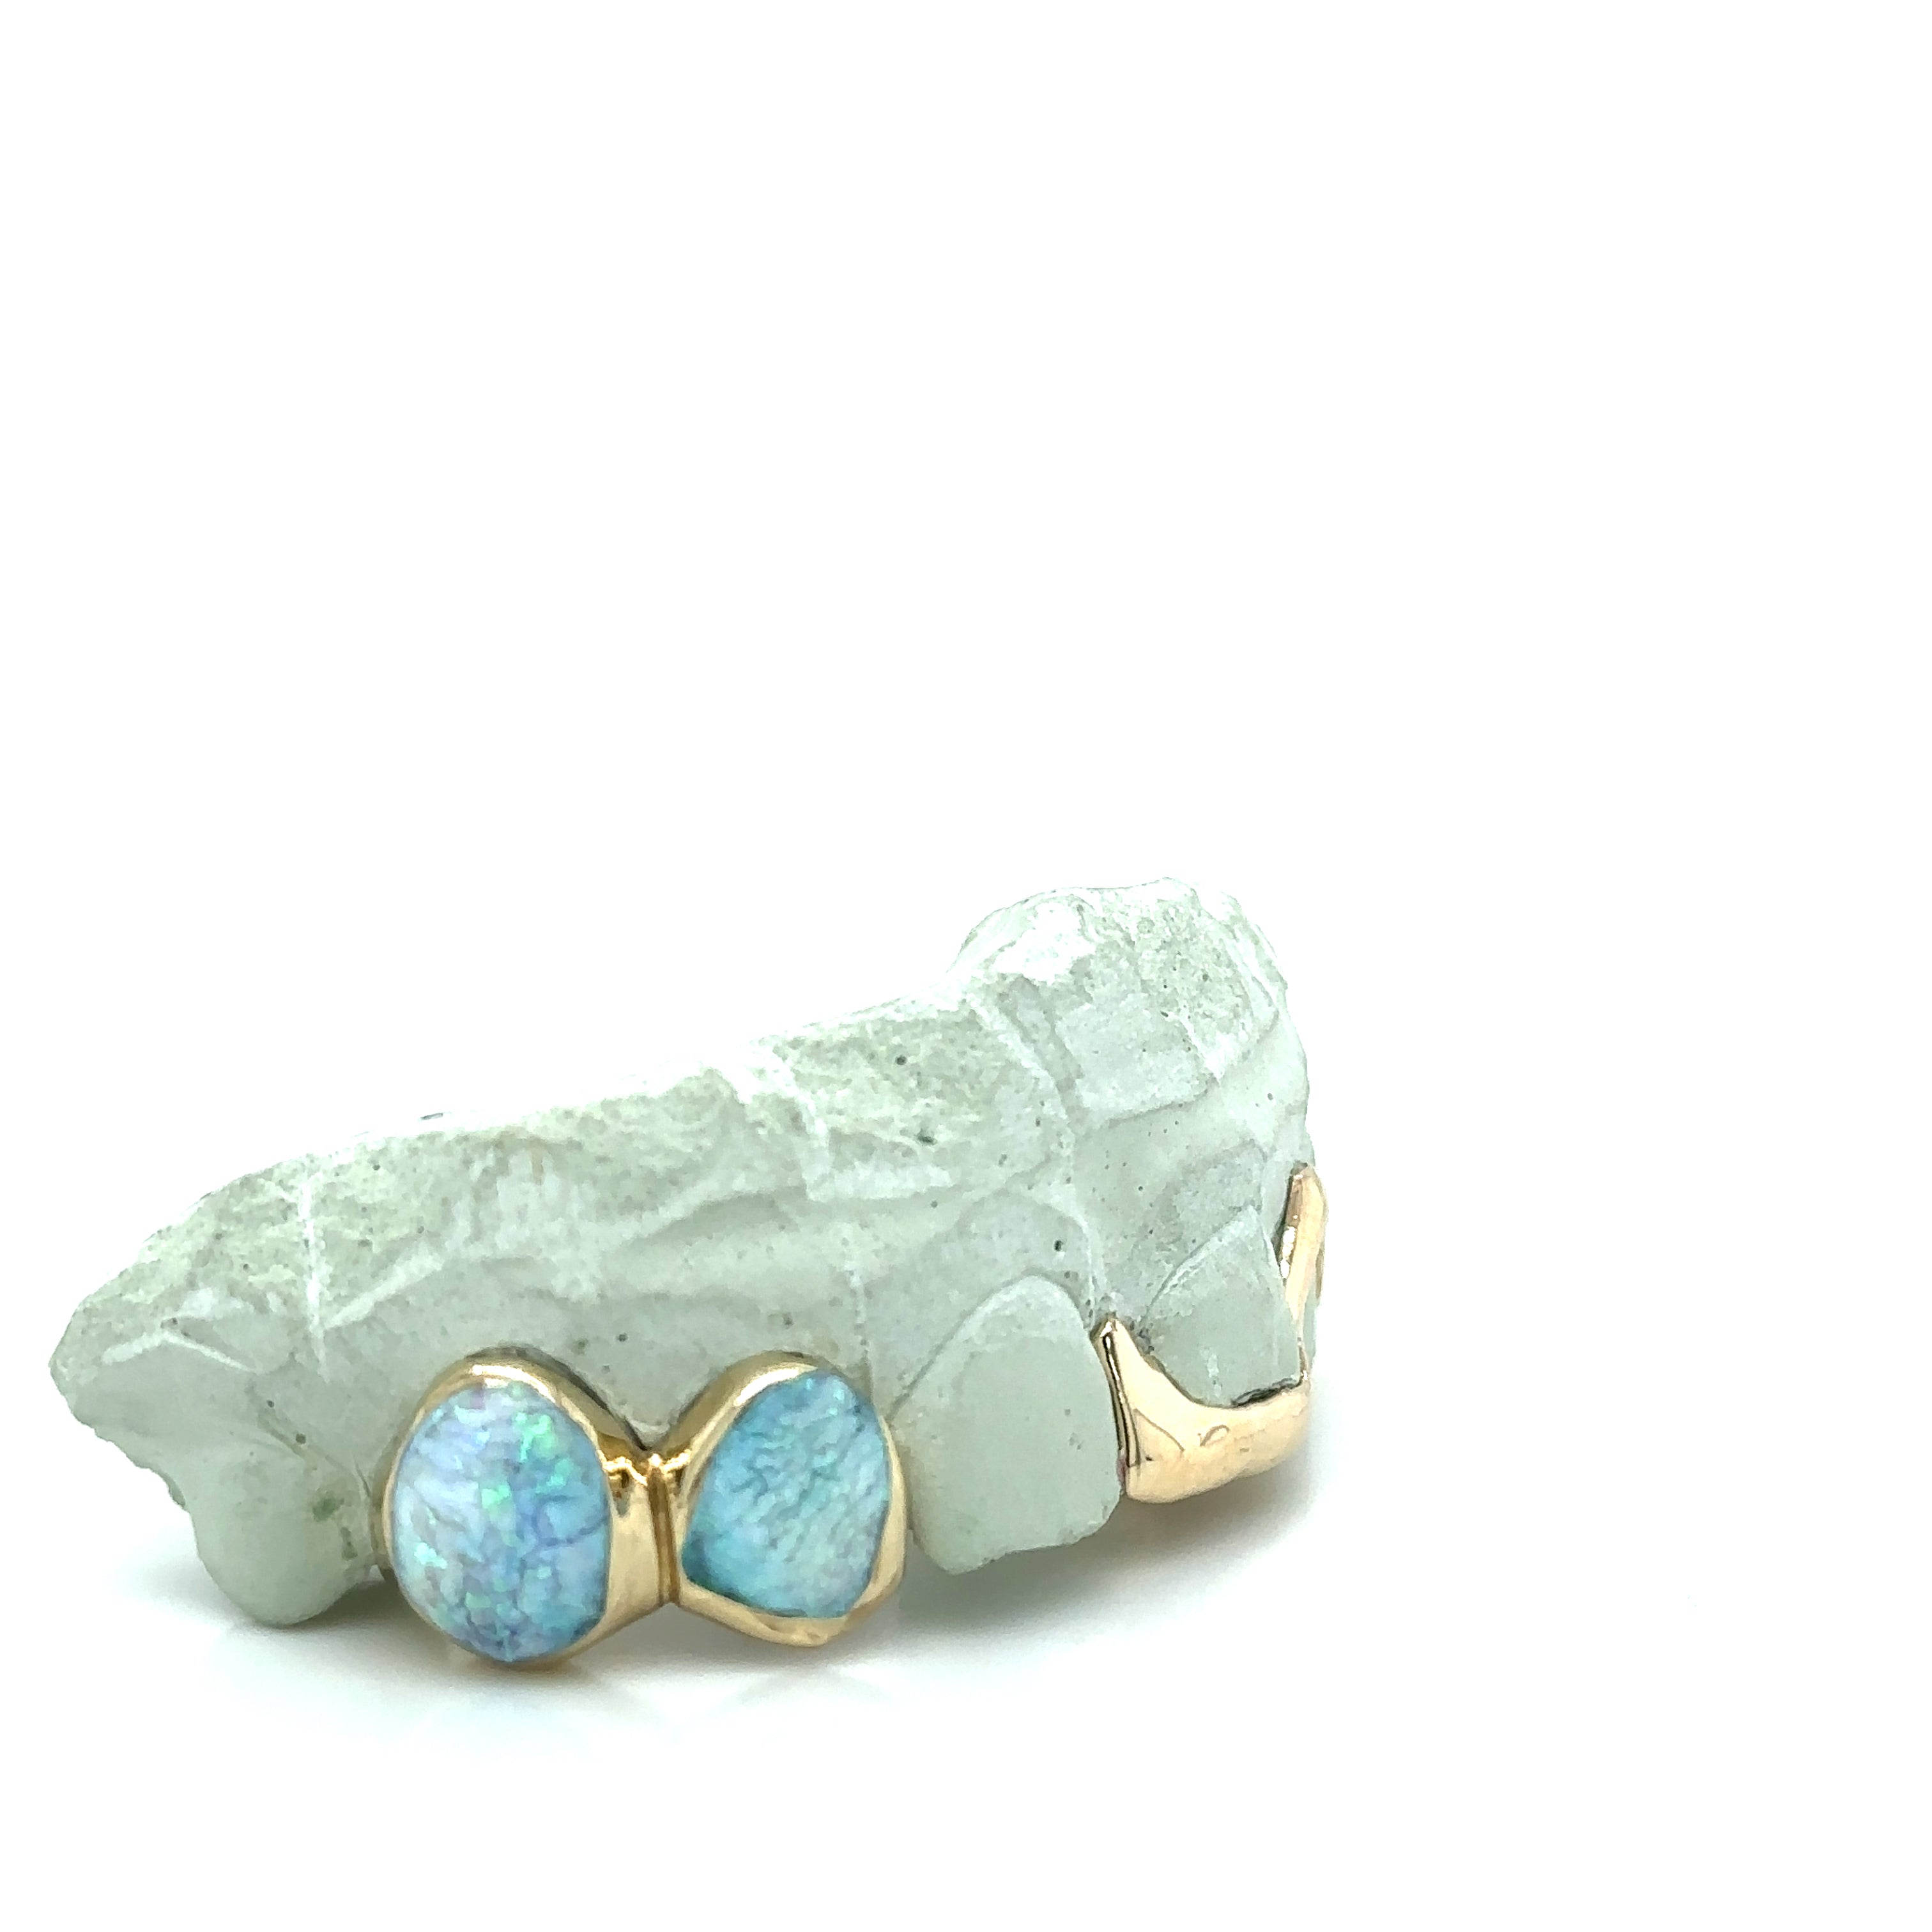 Gold White Opal Gap Spacer Grillz